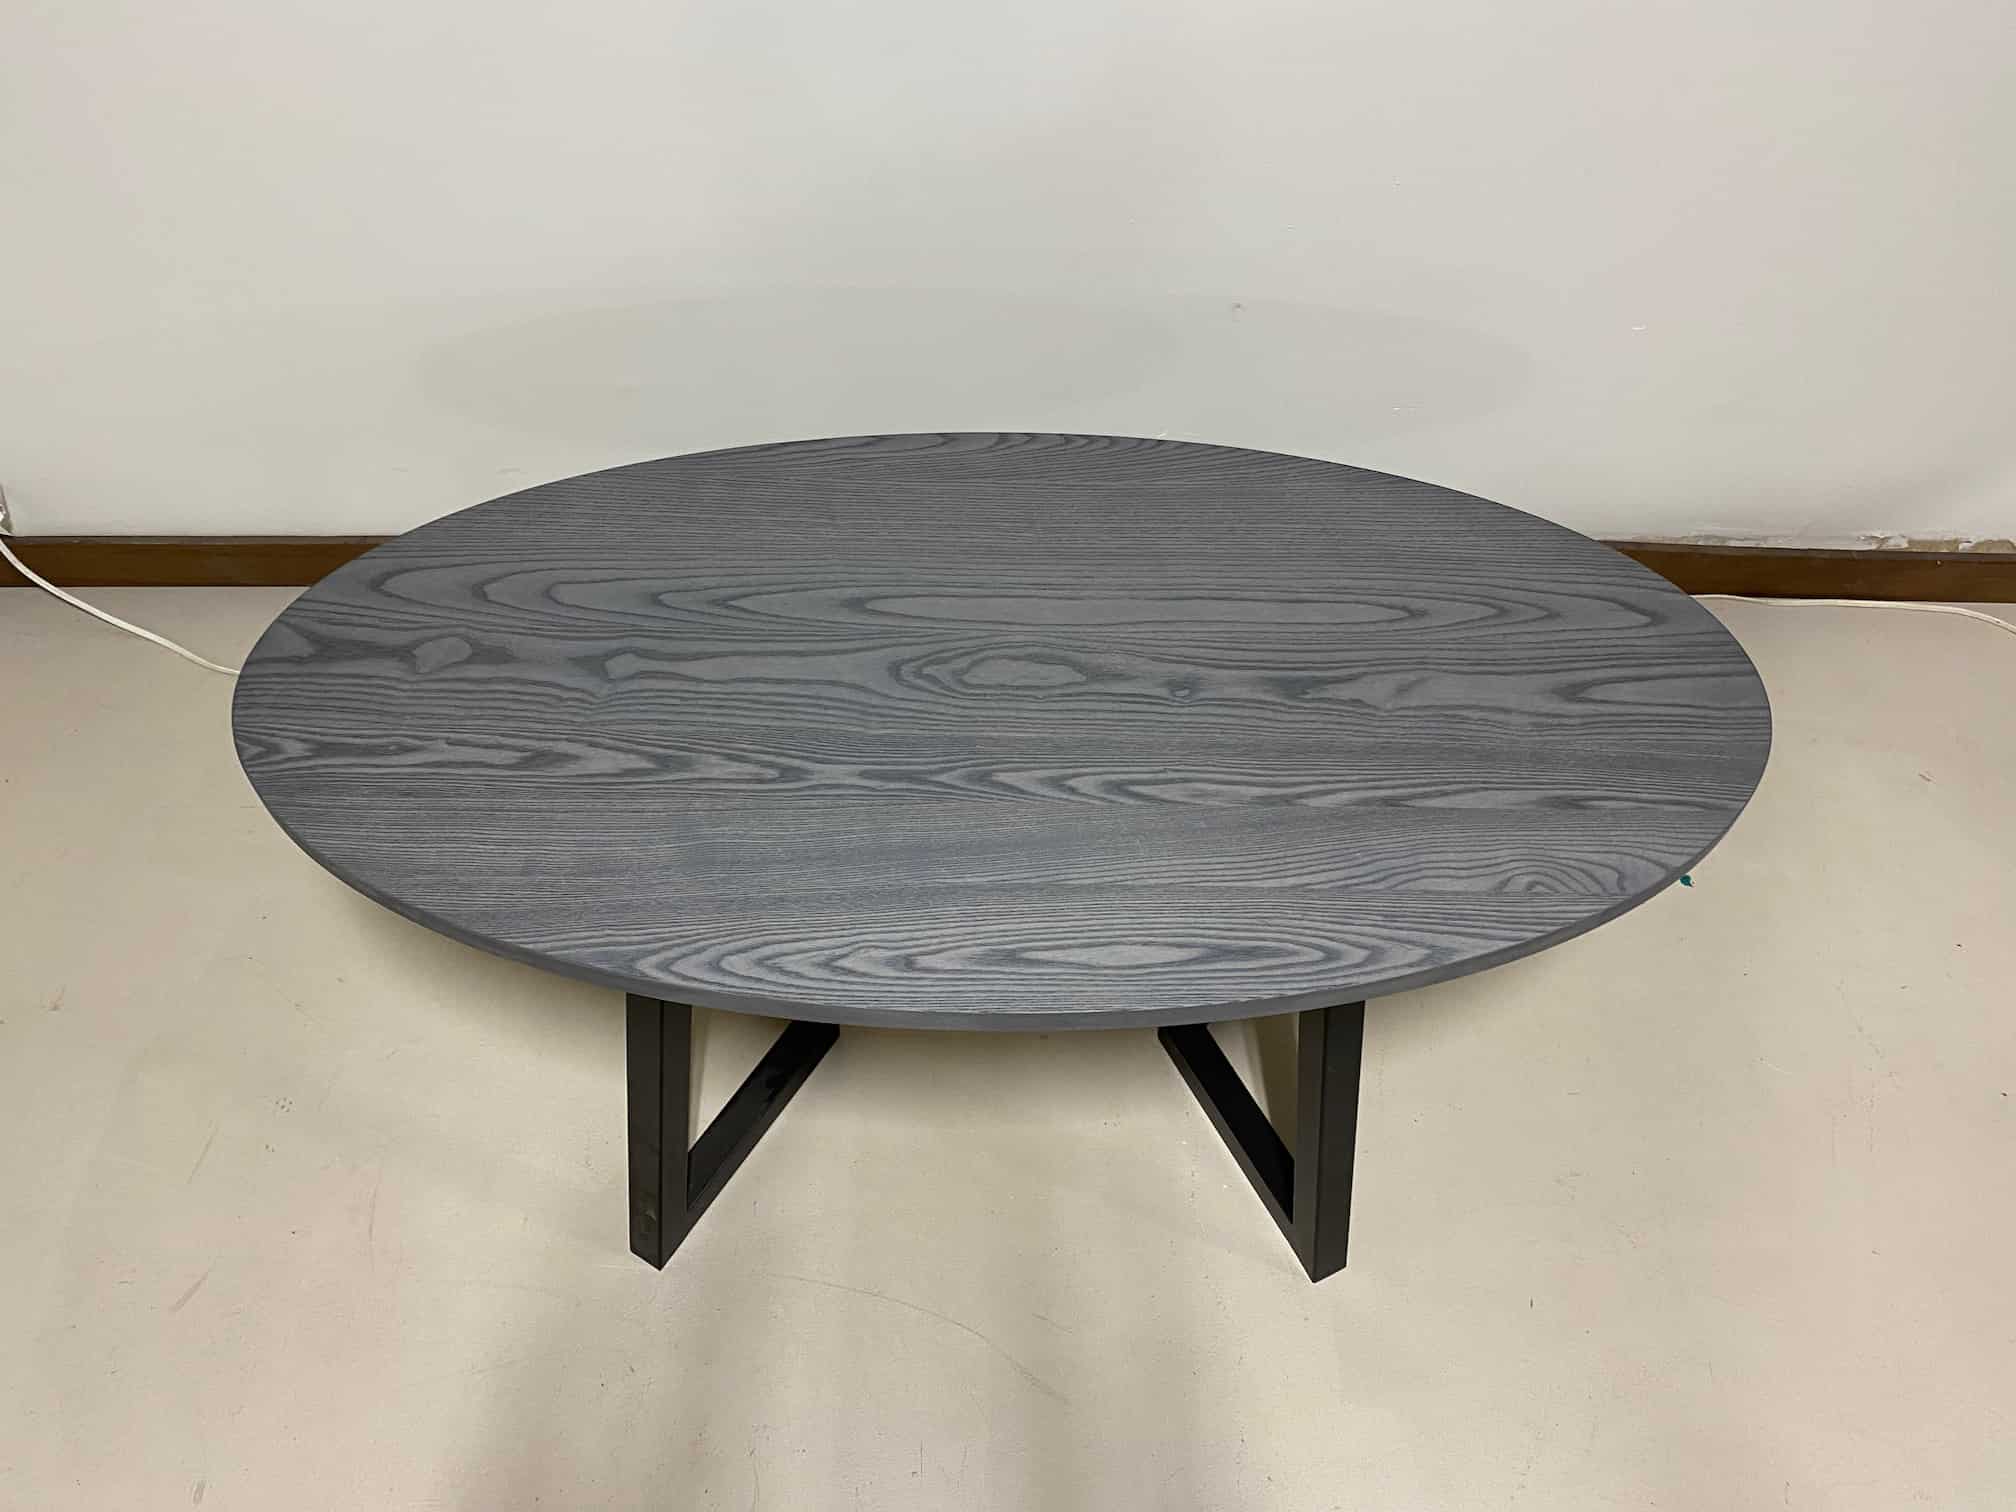 Oval Table 30 x 60 - #1392